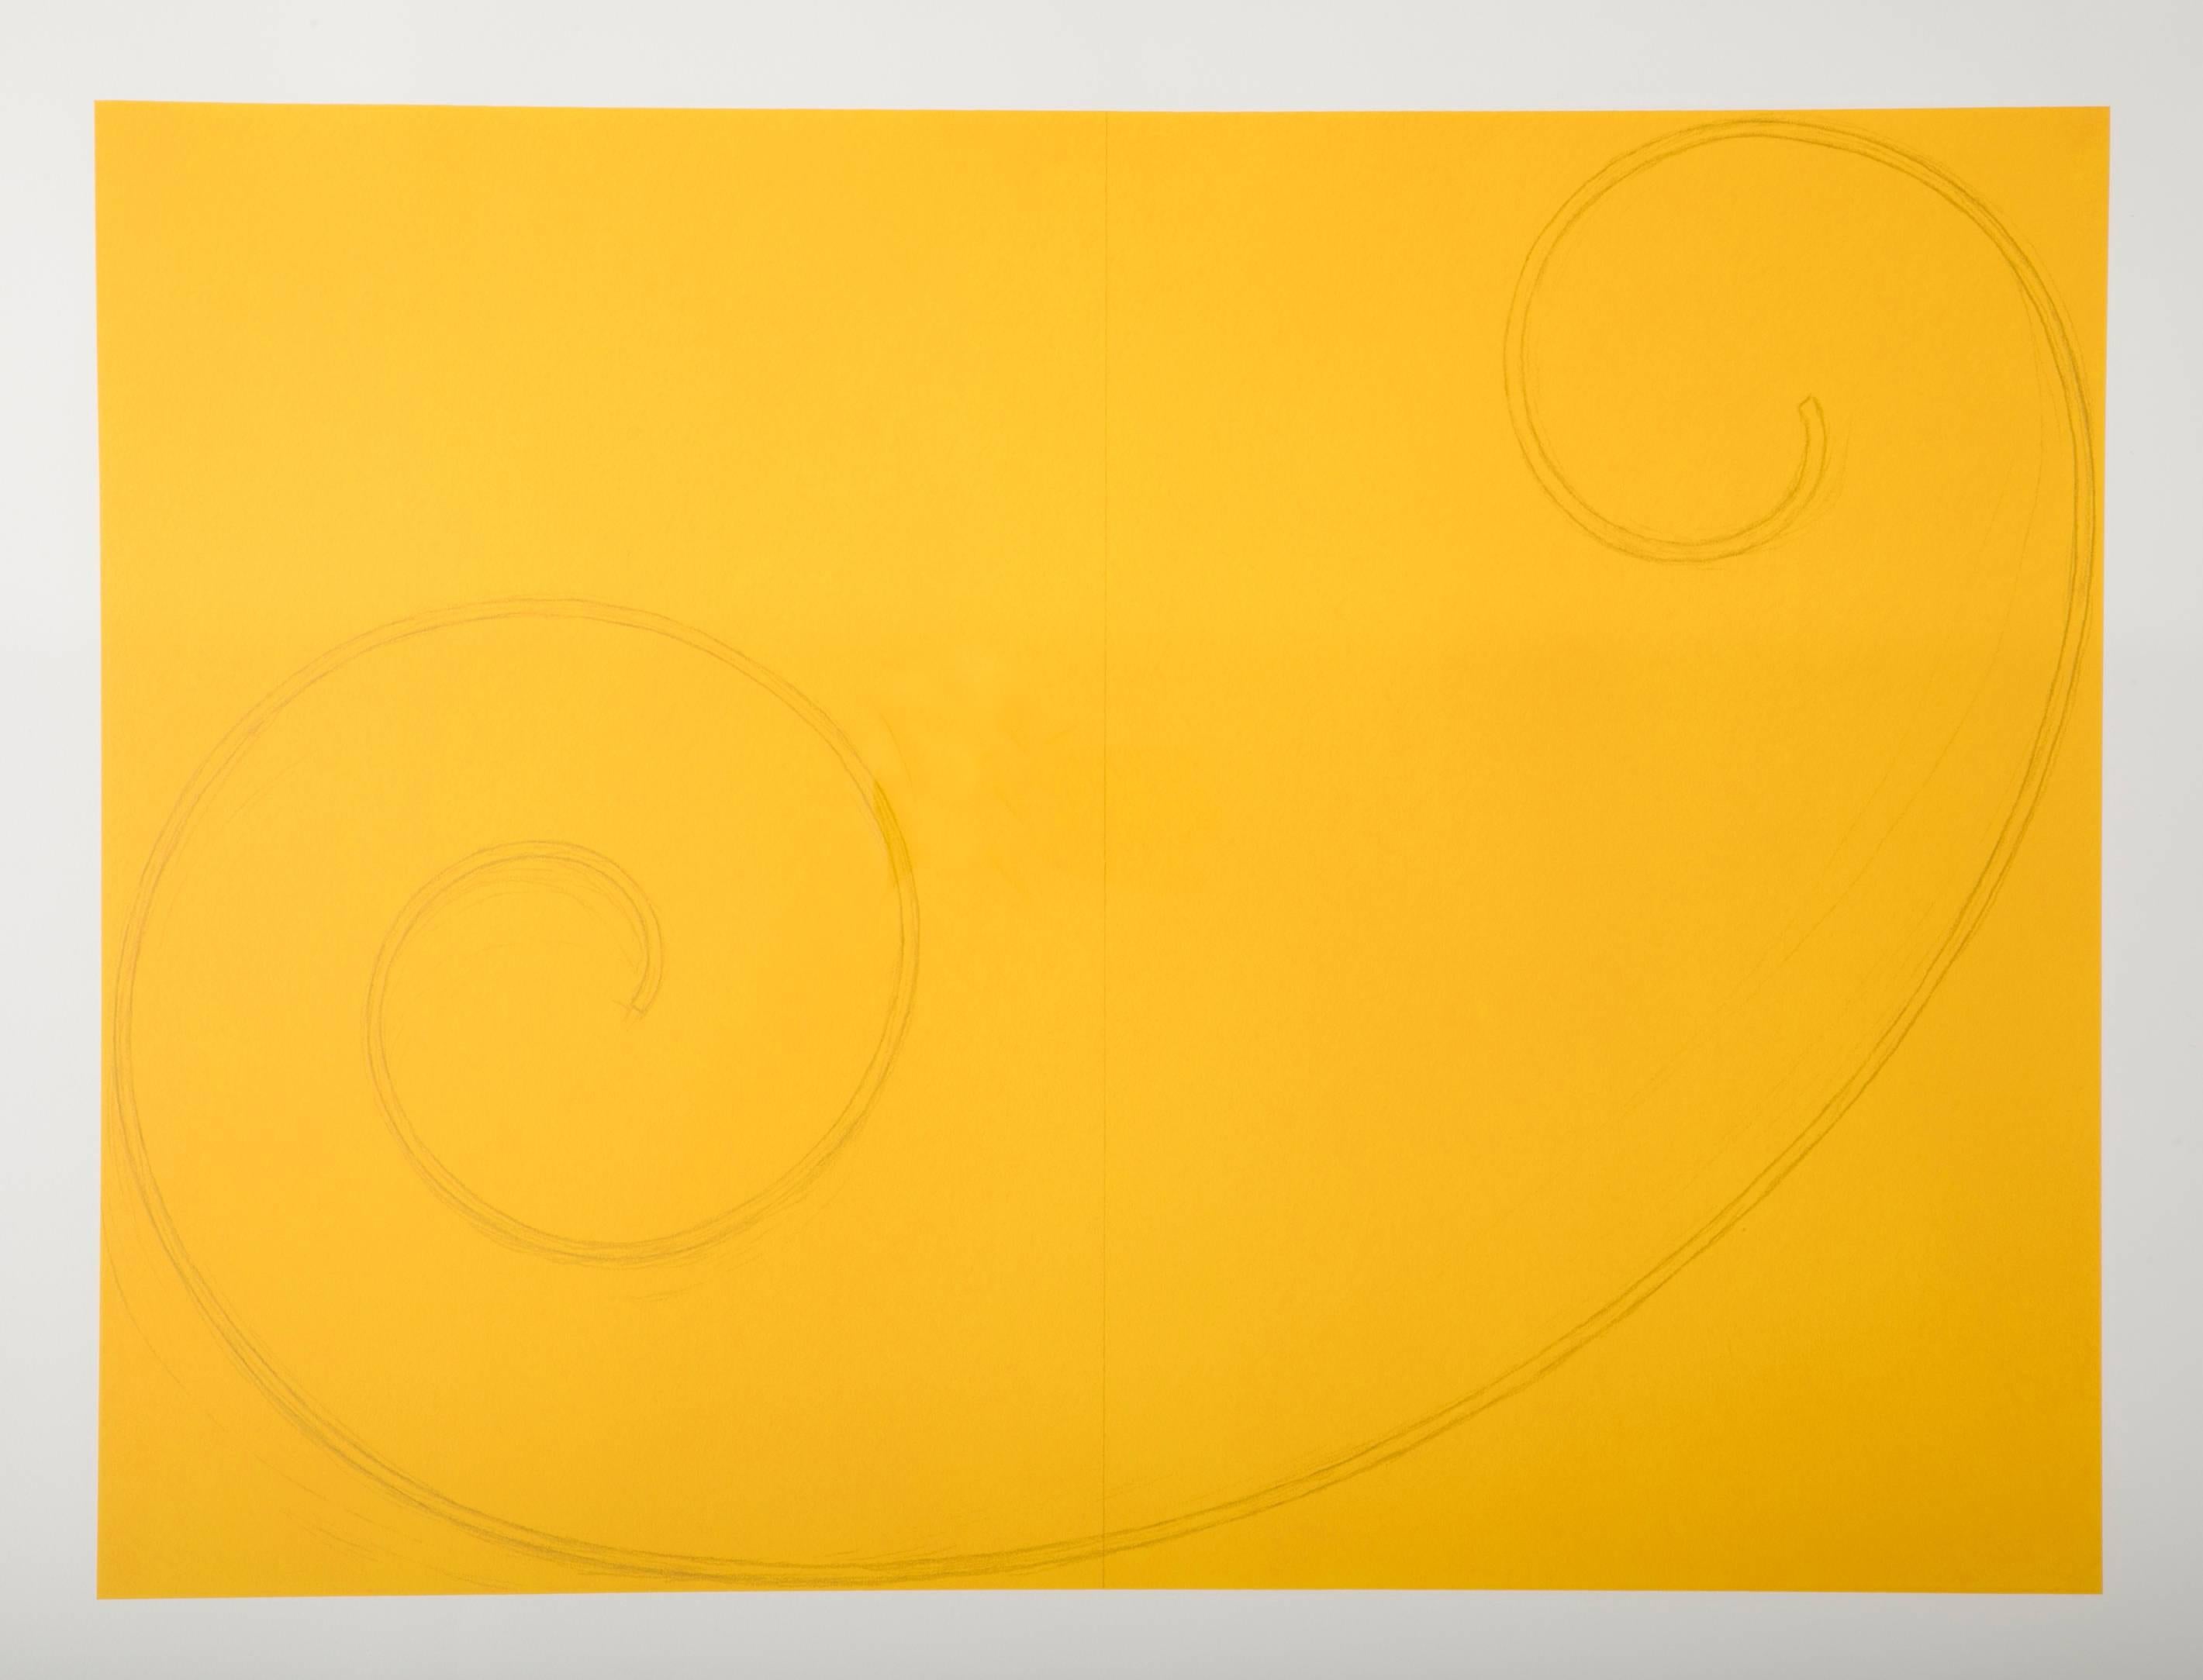 Yellow curled figure a silkscreen by Robert Mangold. Produced by Pace Editions, New York, 2002. Signed and Numbered 10/10 in pencil. Full sheet. 29 3/8